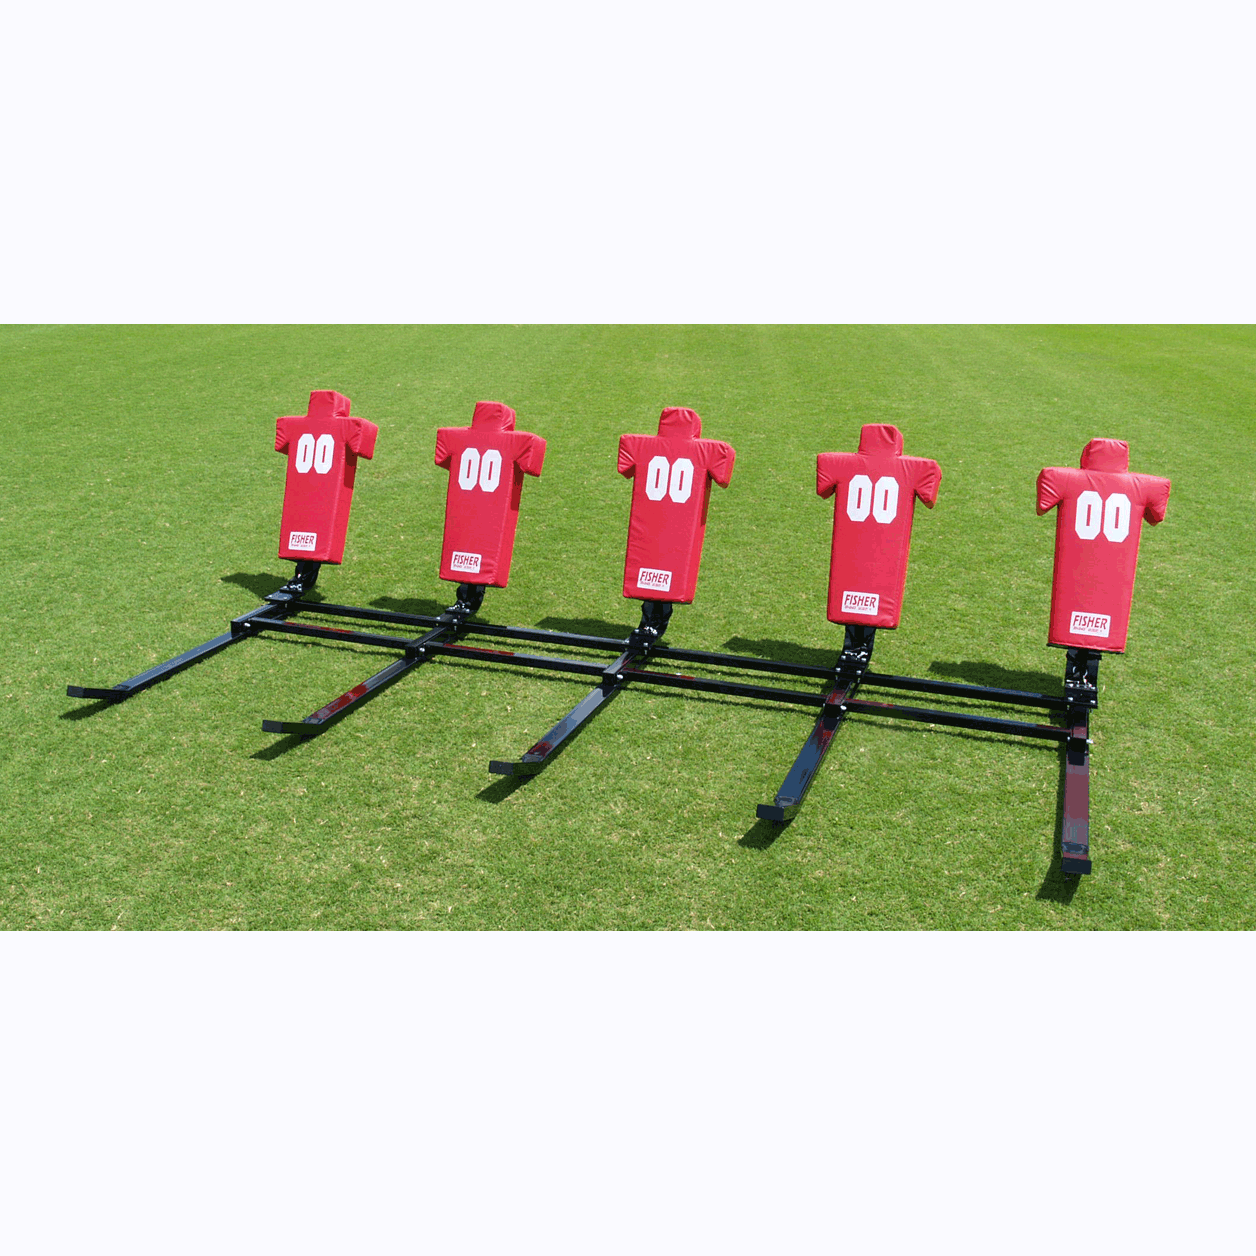 Fisher 3 Man Brute Football Blocking Sled - Pitch Pro Direct